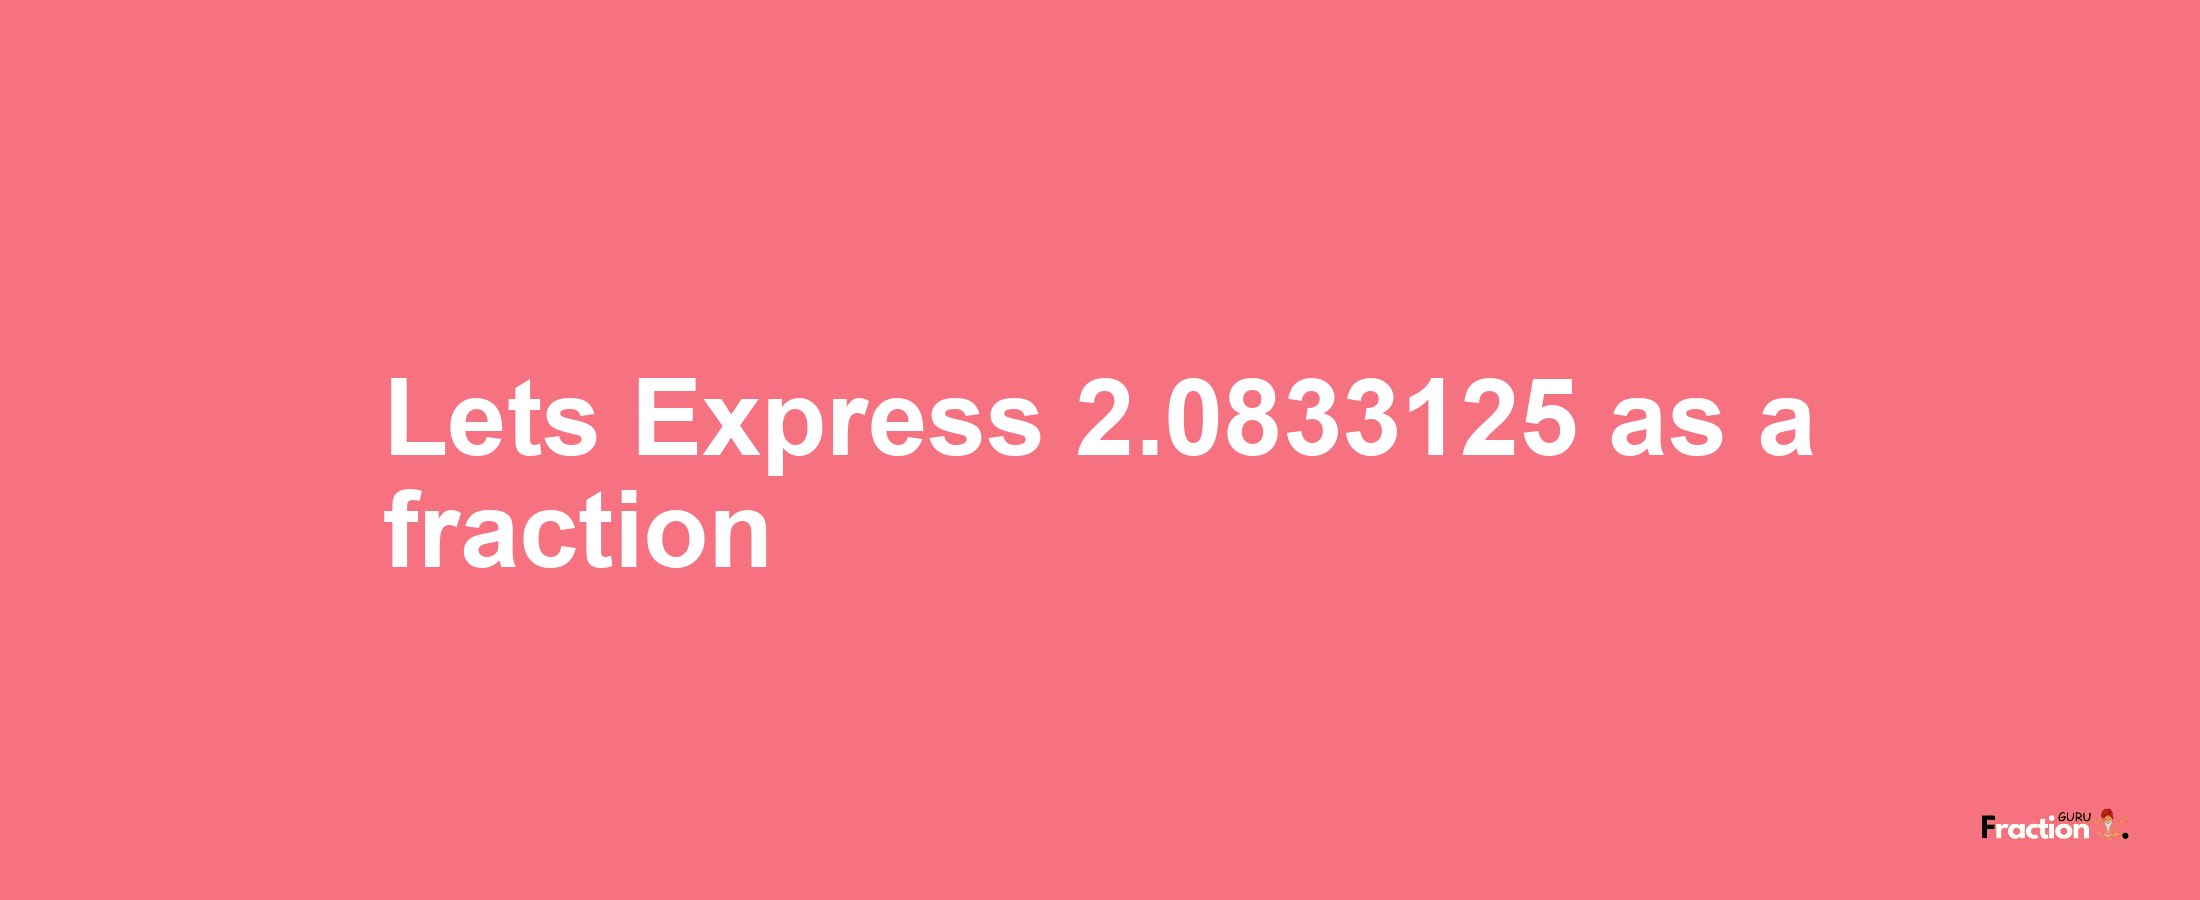 Lets Express 2.0833125 as afraction